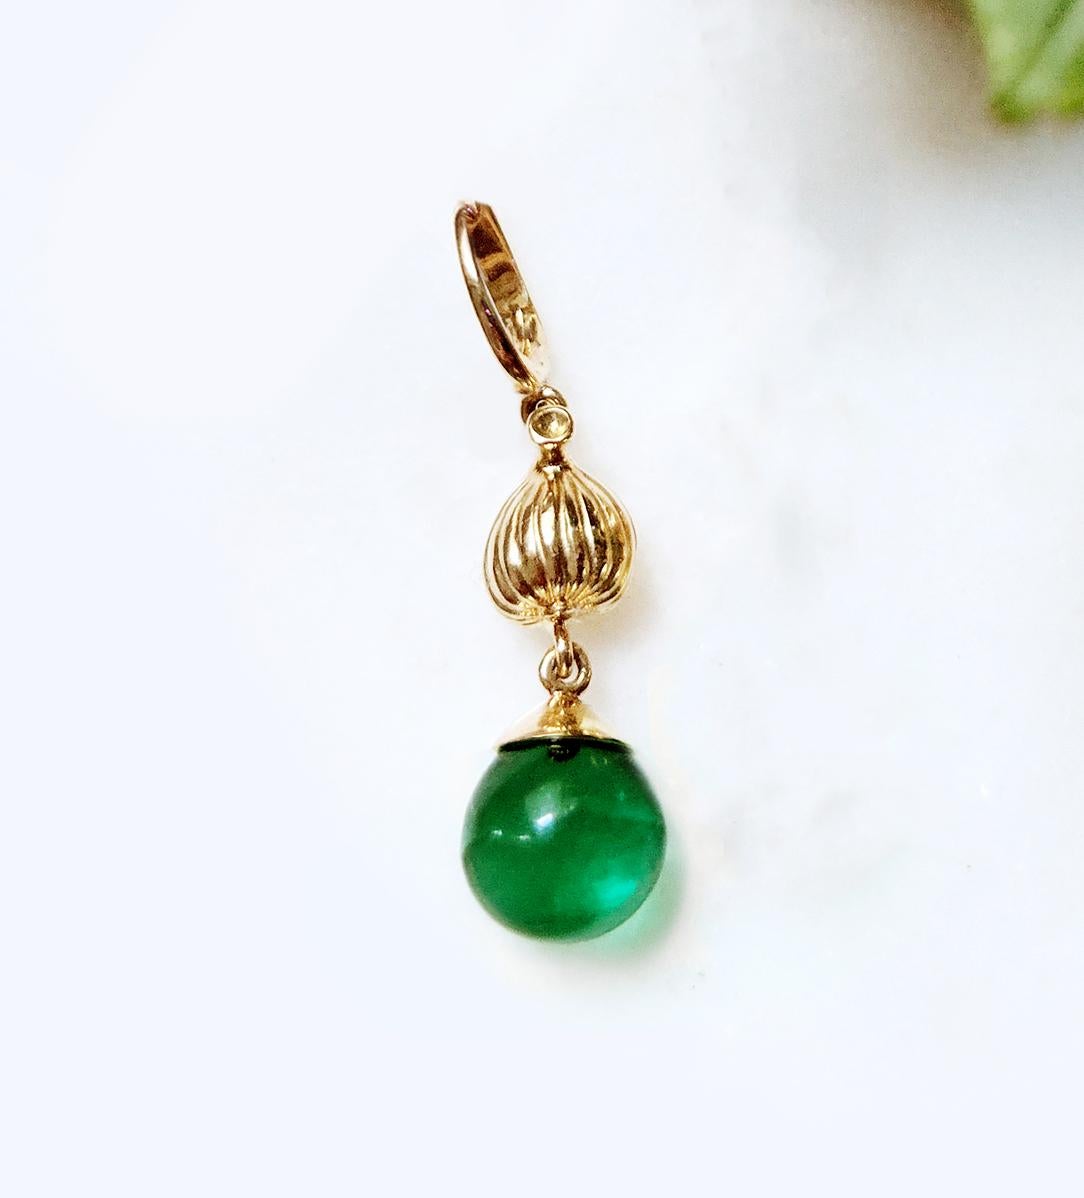 Cabochon Yellow Gold Drop Pendant Necklace with Green Quartz by the Artist For Sale